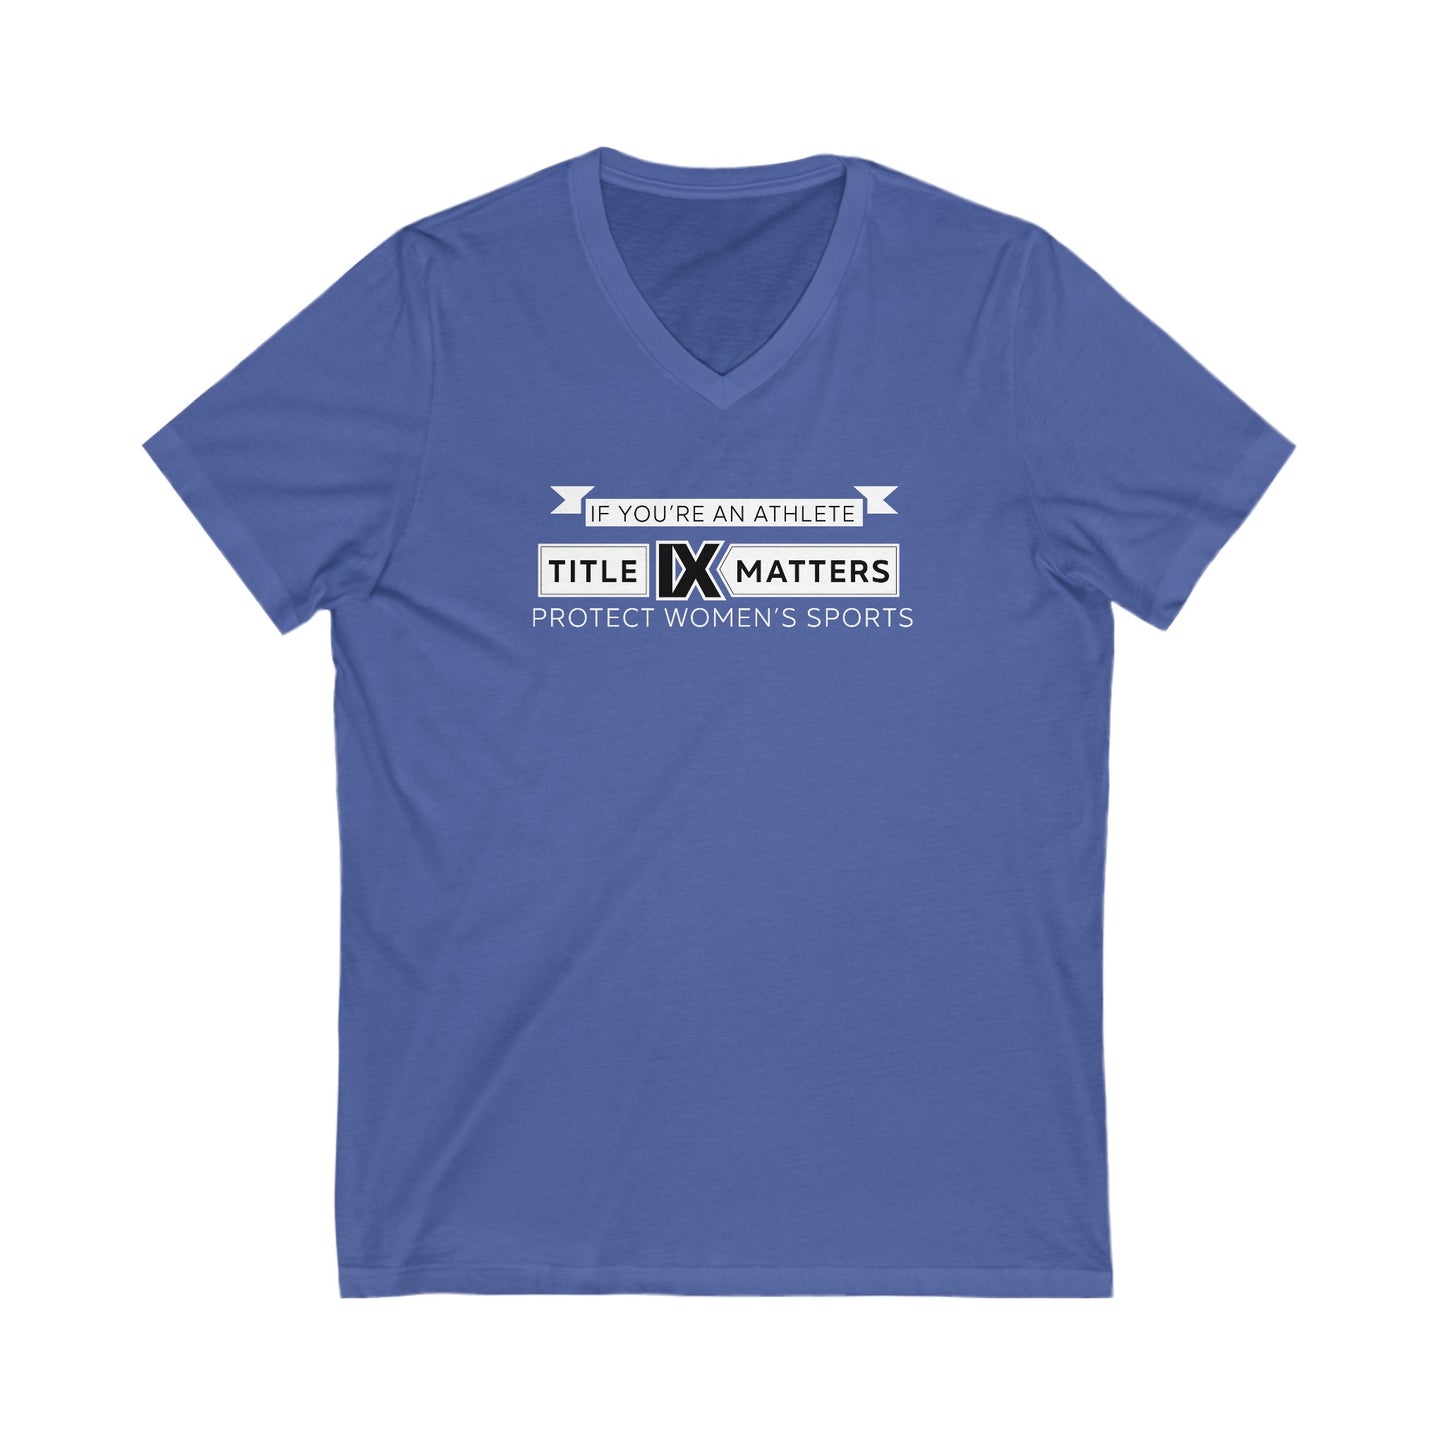 If You're an Athlete - Title IX Matters - V-Neck